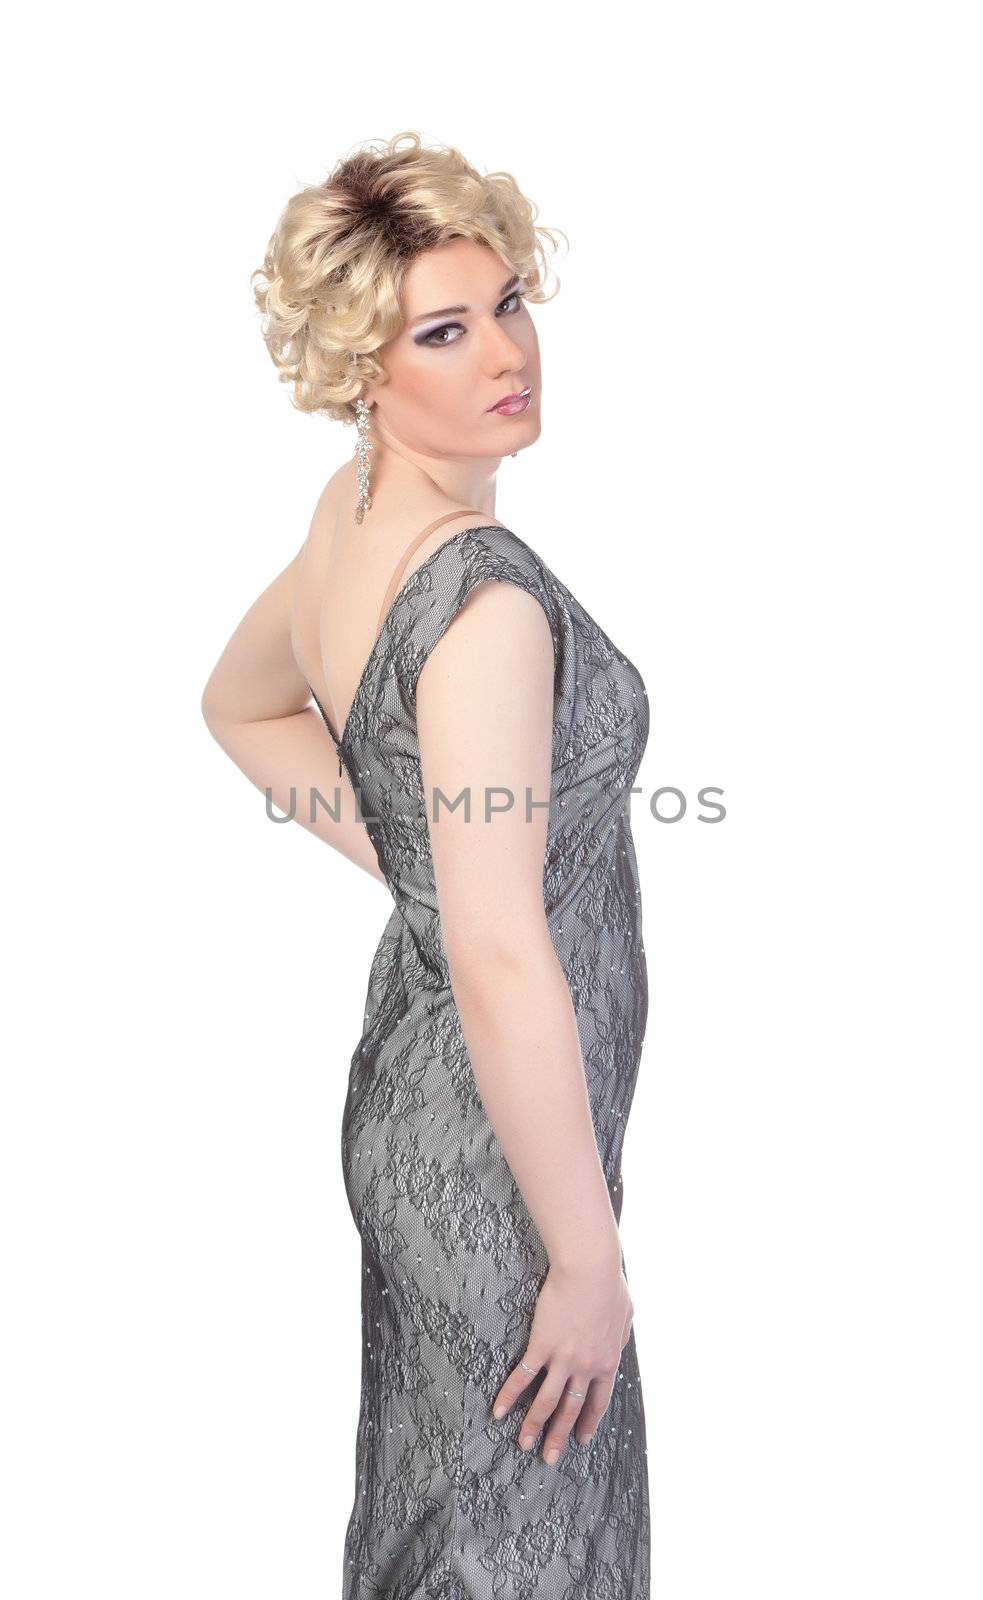 Portrait of drag queen. Man dressed as Woman, isolated on white background